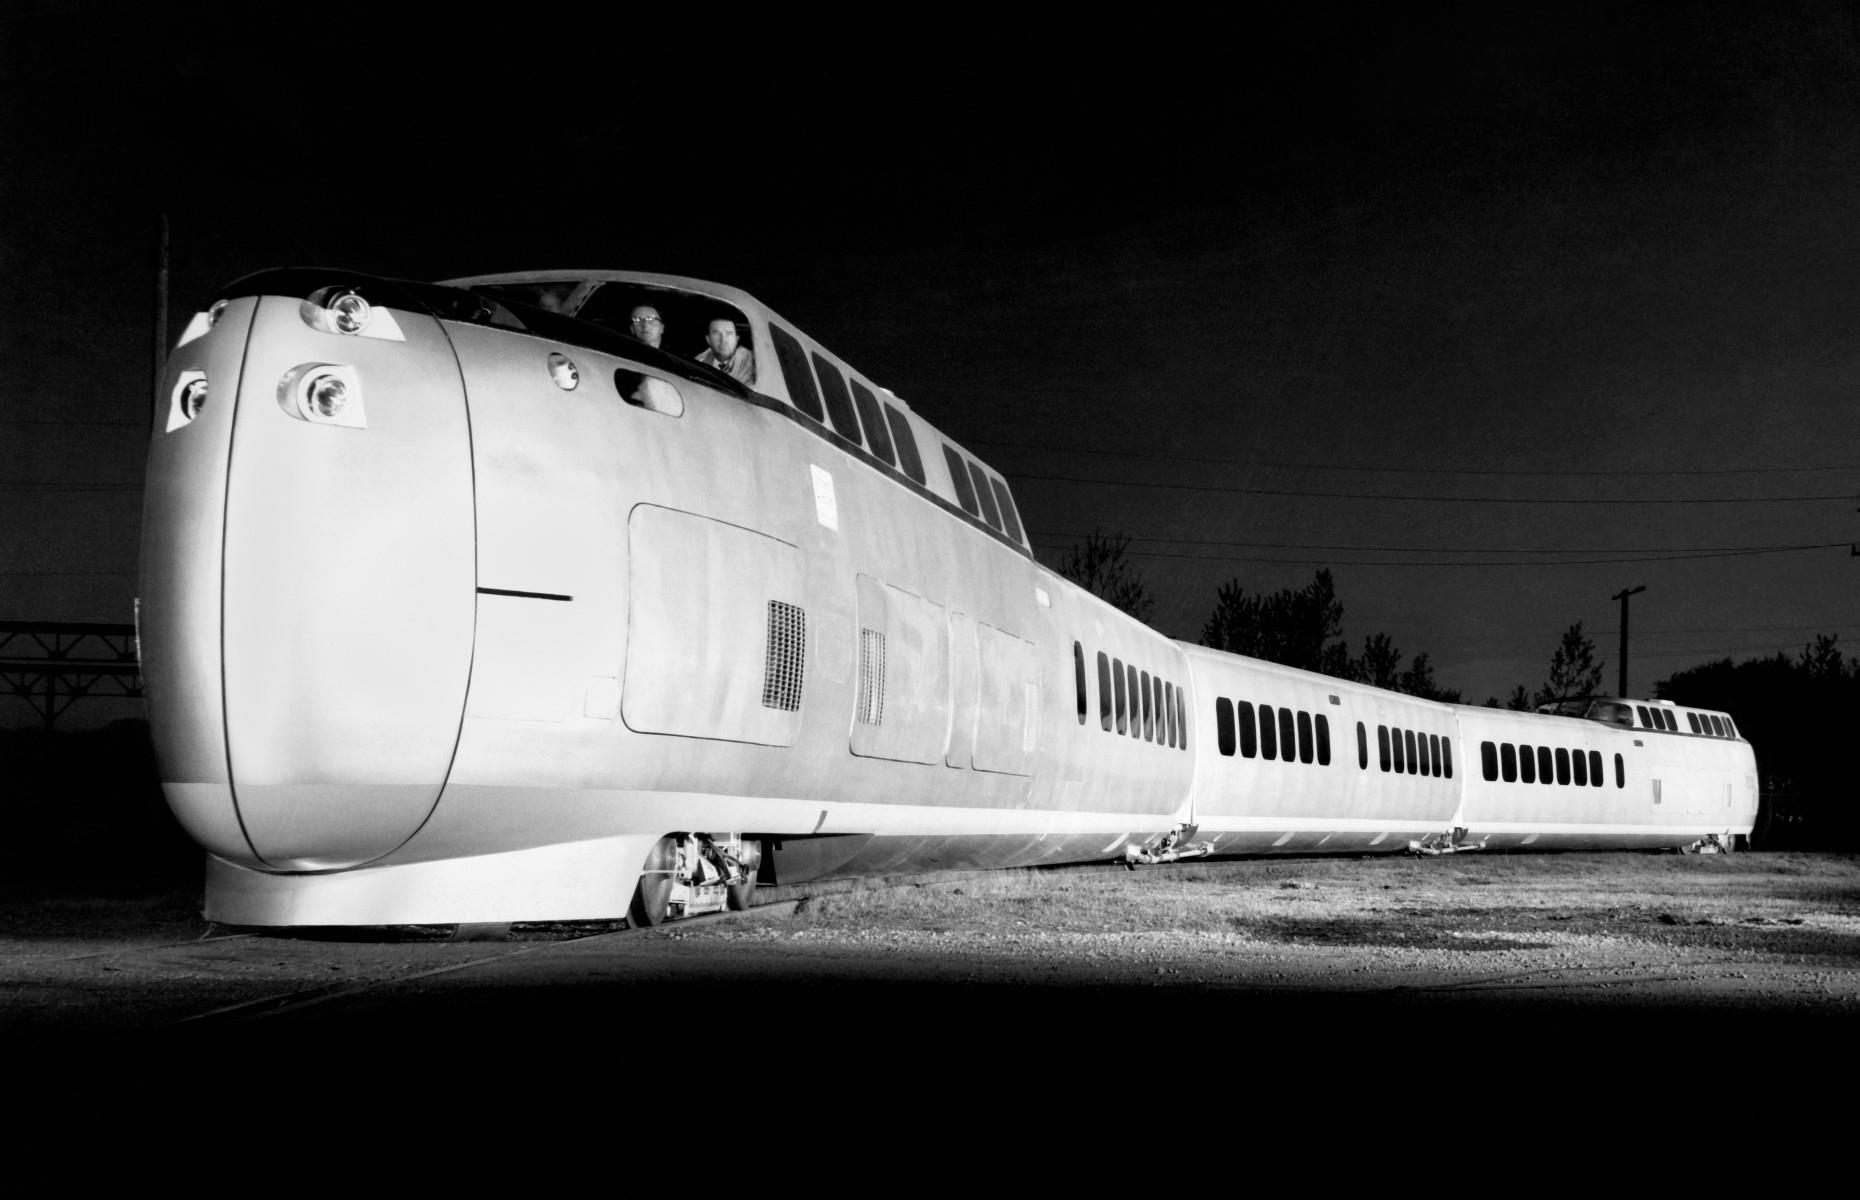 <p>In the late 1960s rail travel entered the jet age with a new piece of kit: the Turbotrain, pictured here in 1968. Built by an aircraft manufacturer, Turbotrains were powered by gas-turbine engines similar to those found on airliners and featured tilt technology to take corners at high speed. Despite the cutting-edge tech, Turbotrains were scrapped after only a few years thanks to increasing fuel costs during the global oil crisis.</p>